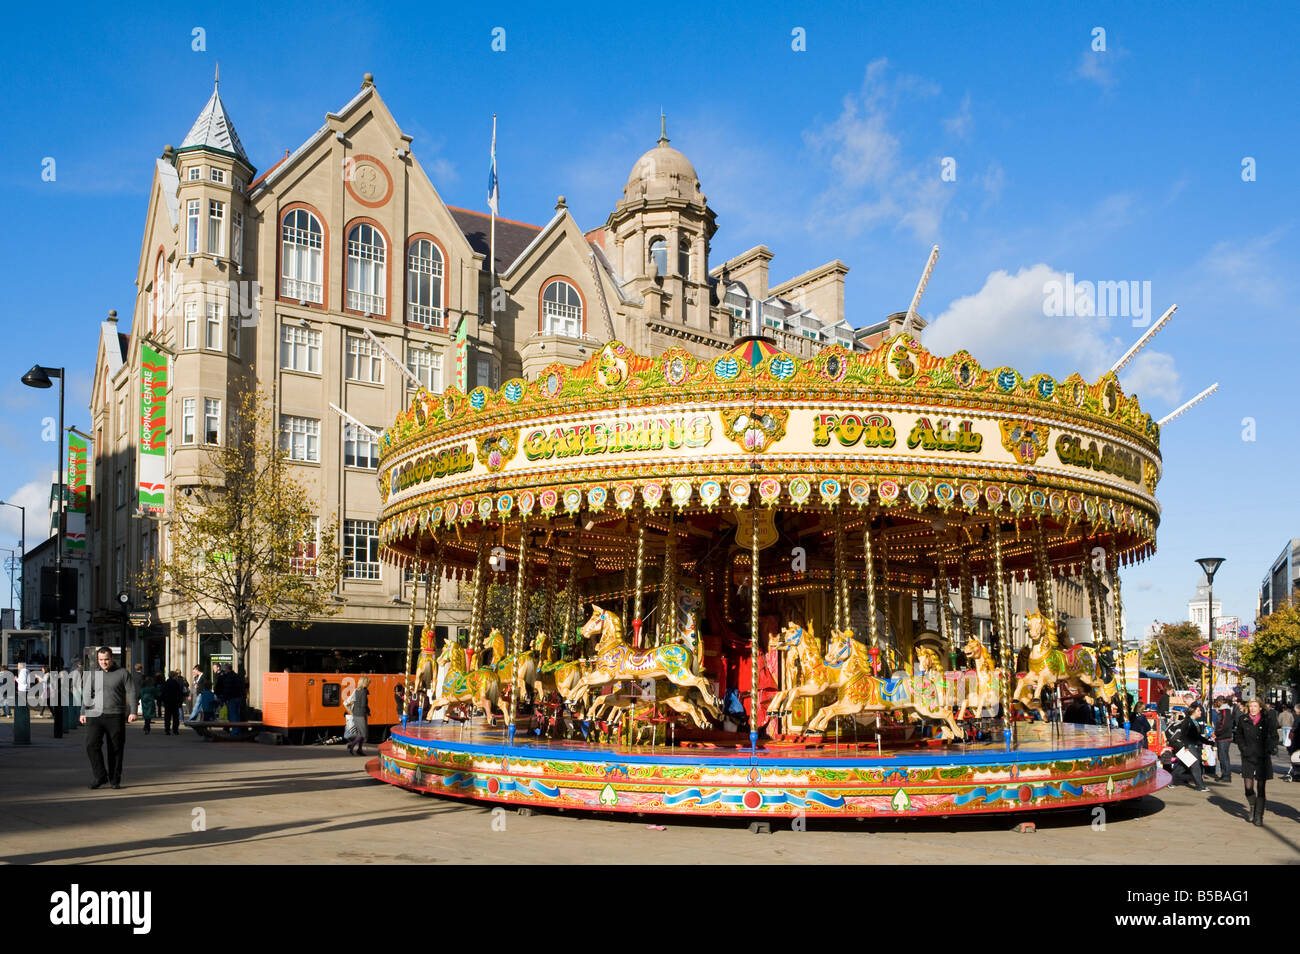 Karussell in Fargate Sheffield, "South Yorkshire" England "Great Britain" Stockfoto